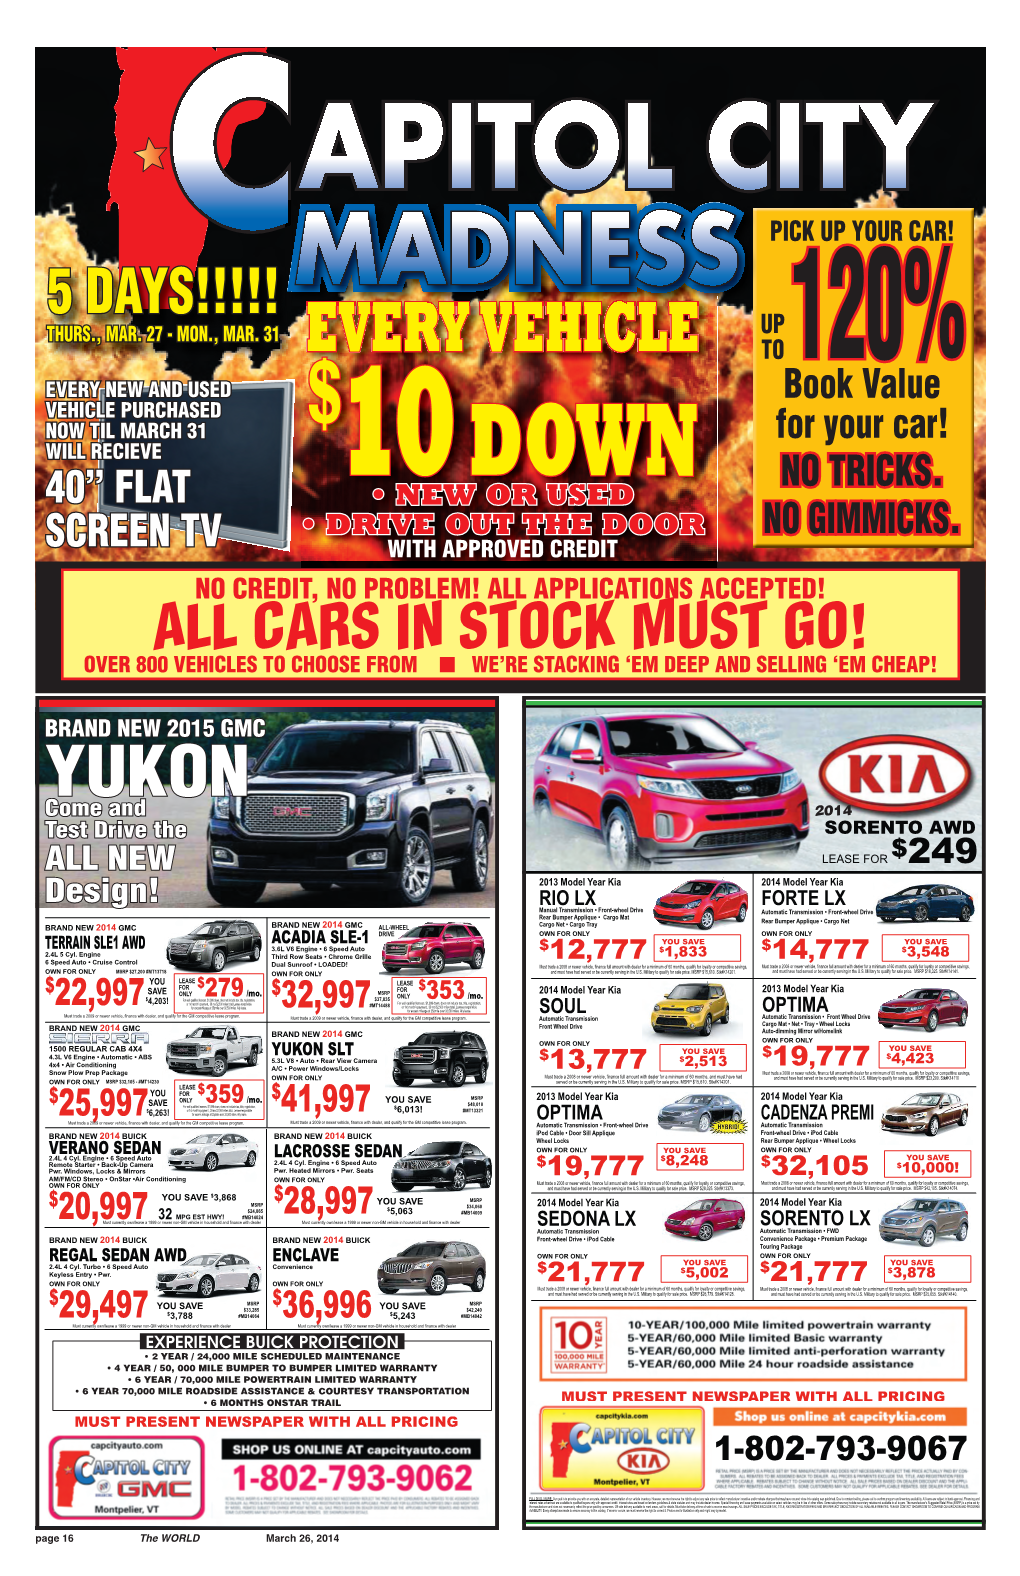 EVERY VEHICLE to 120% EVERY NEW and USED Book Value VEHICLE PURCHASED $ NOW TIL MARCH 31 for Your Car! WILL RECIEVE 10 DOWN NO TRICKS